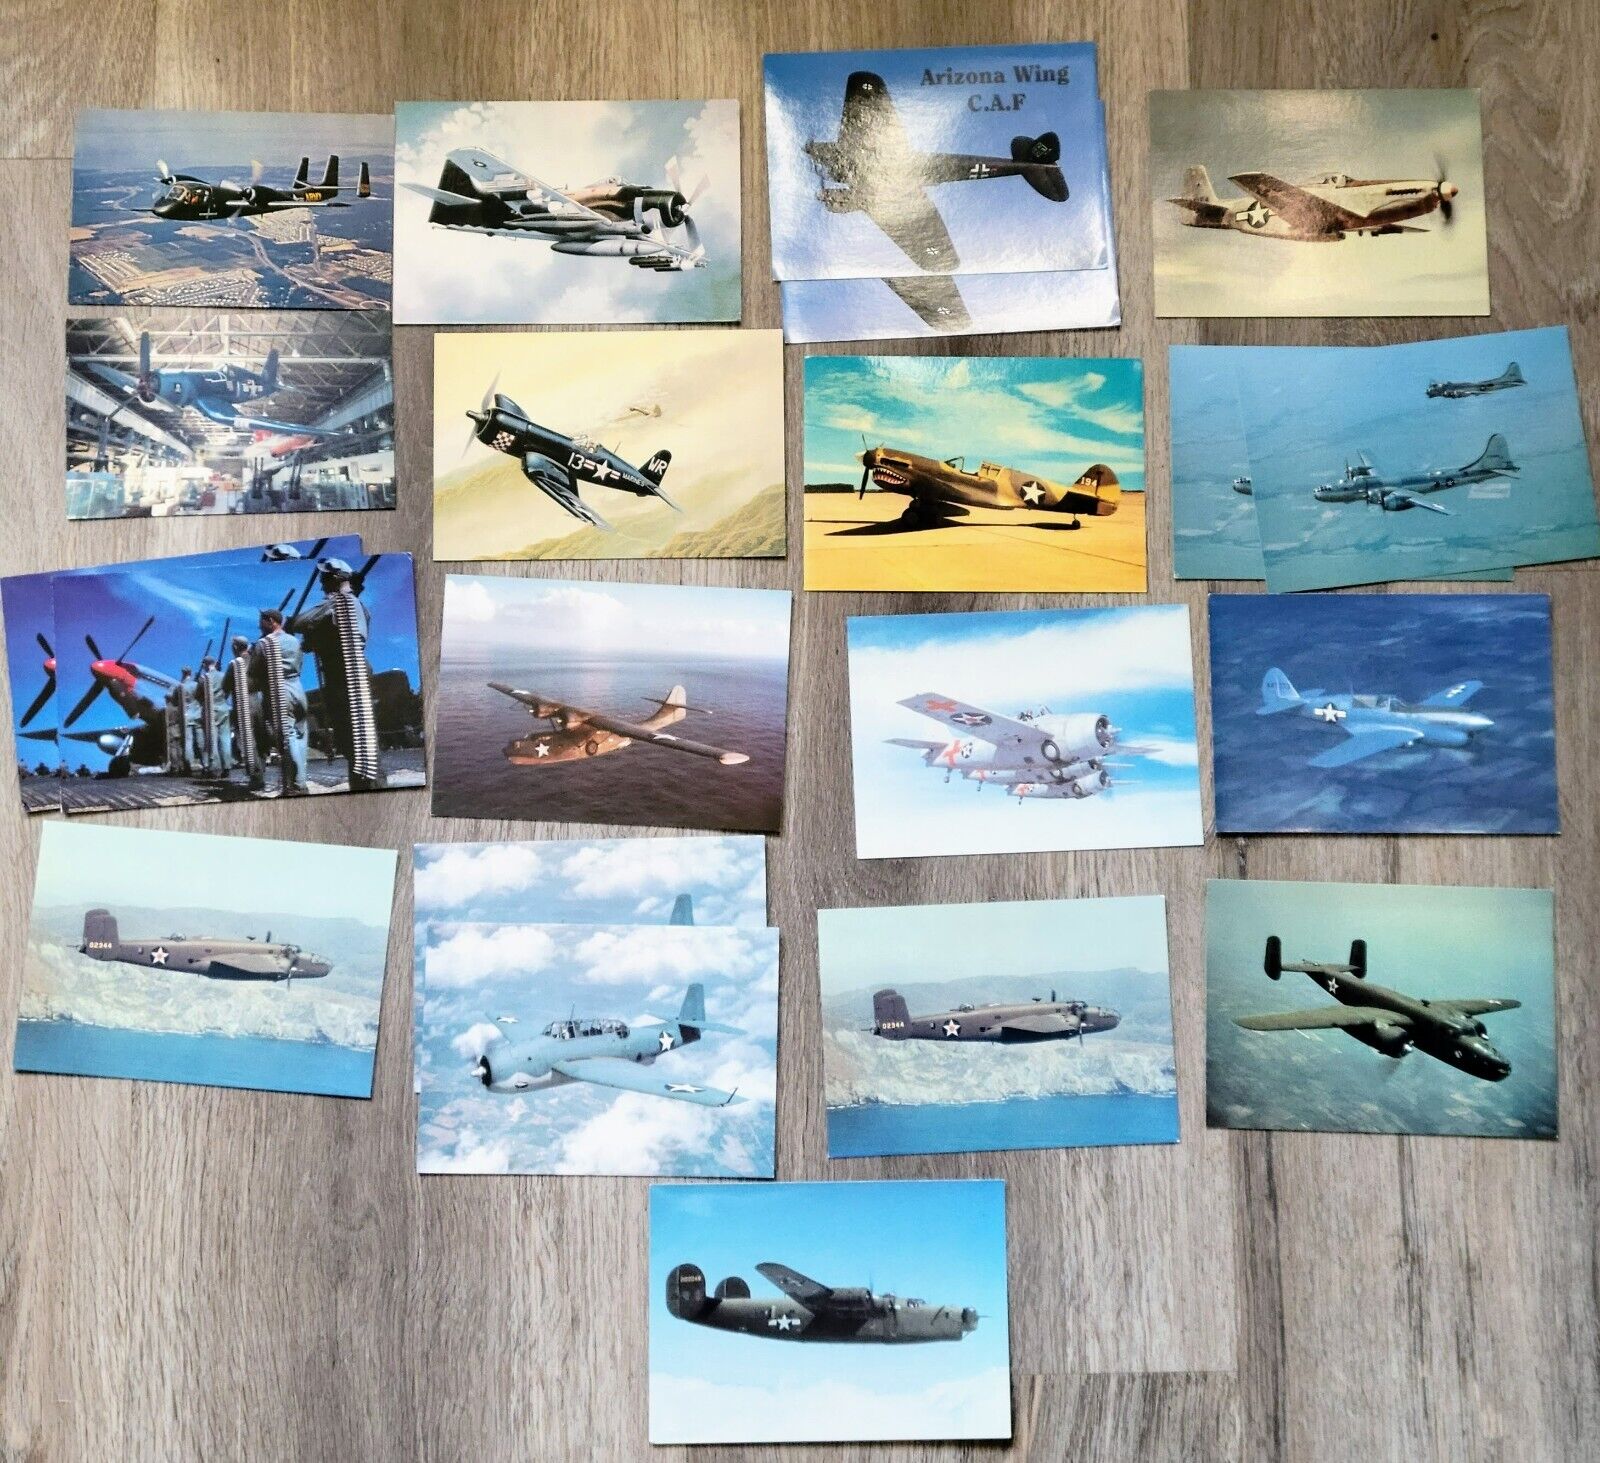 Lot of 21 Vintage Aircraft Postcard US Air Forces Fighters Planes - WWII